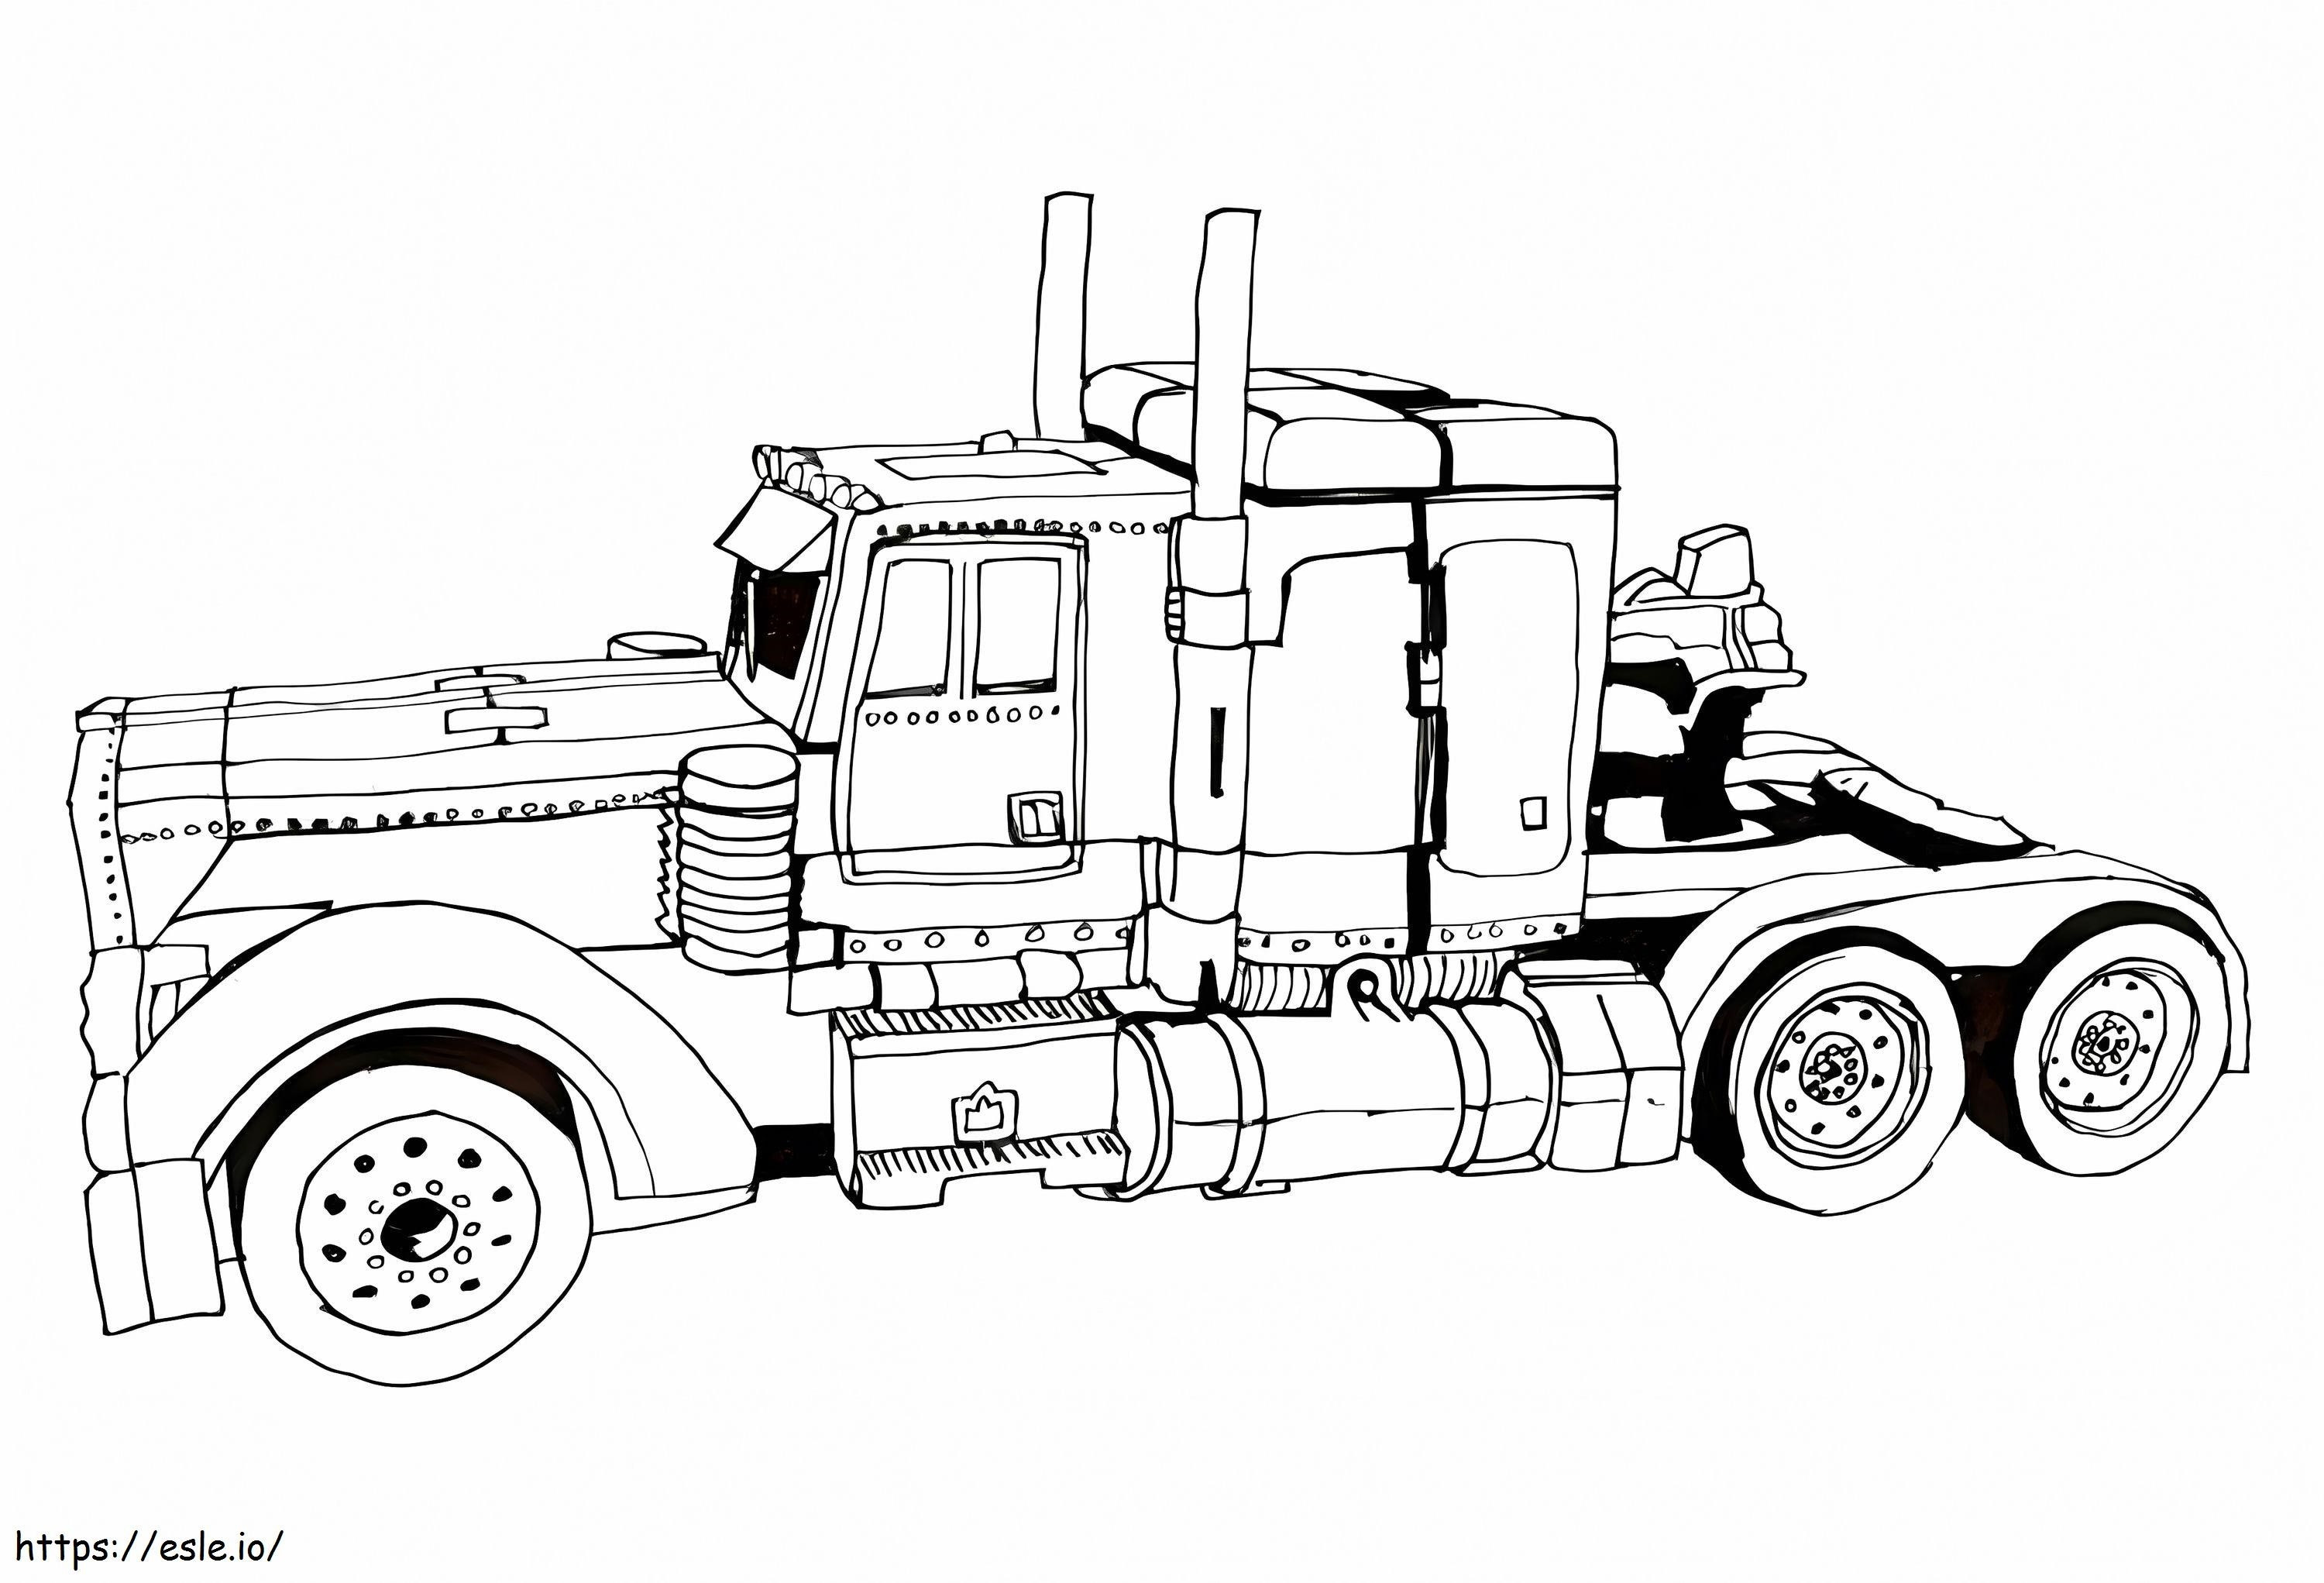 Optimus Prime Truck 1 coloring page